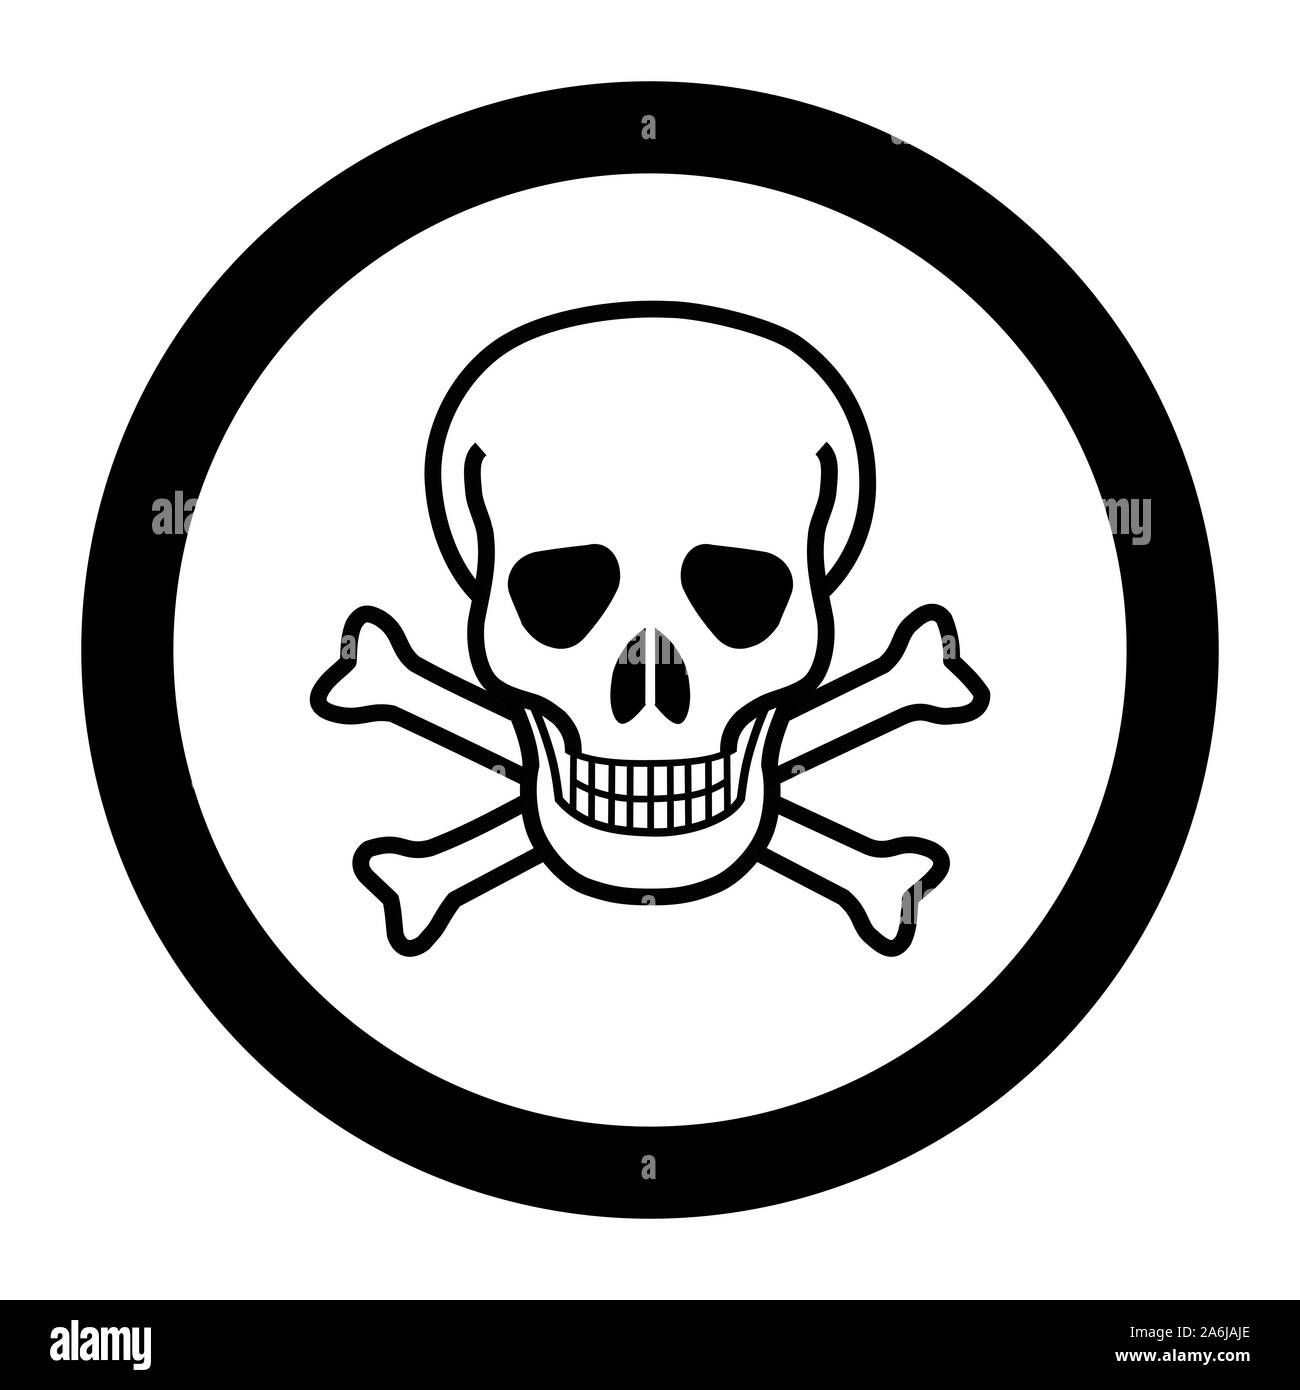 White skull and crossbones in a circle Stock Photo